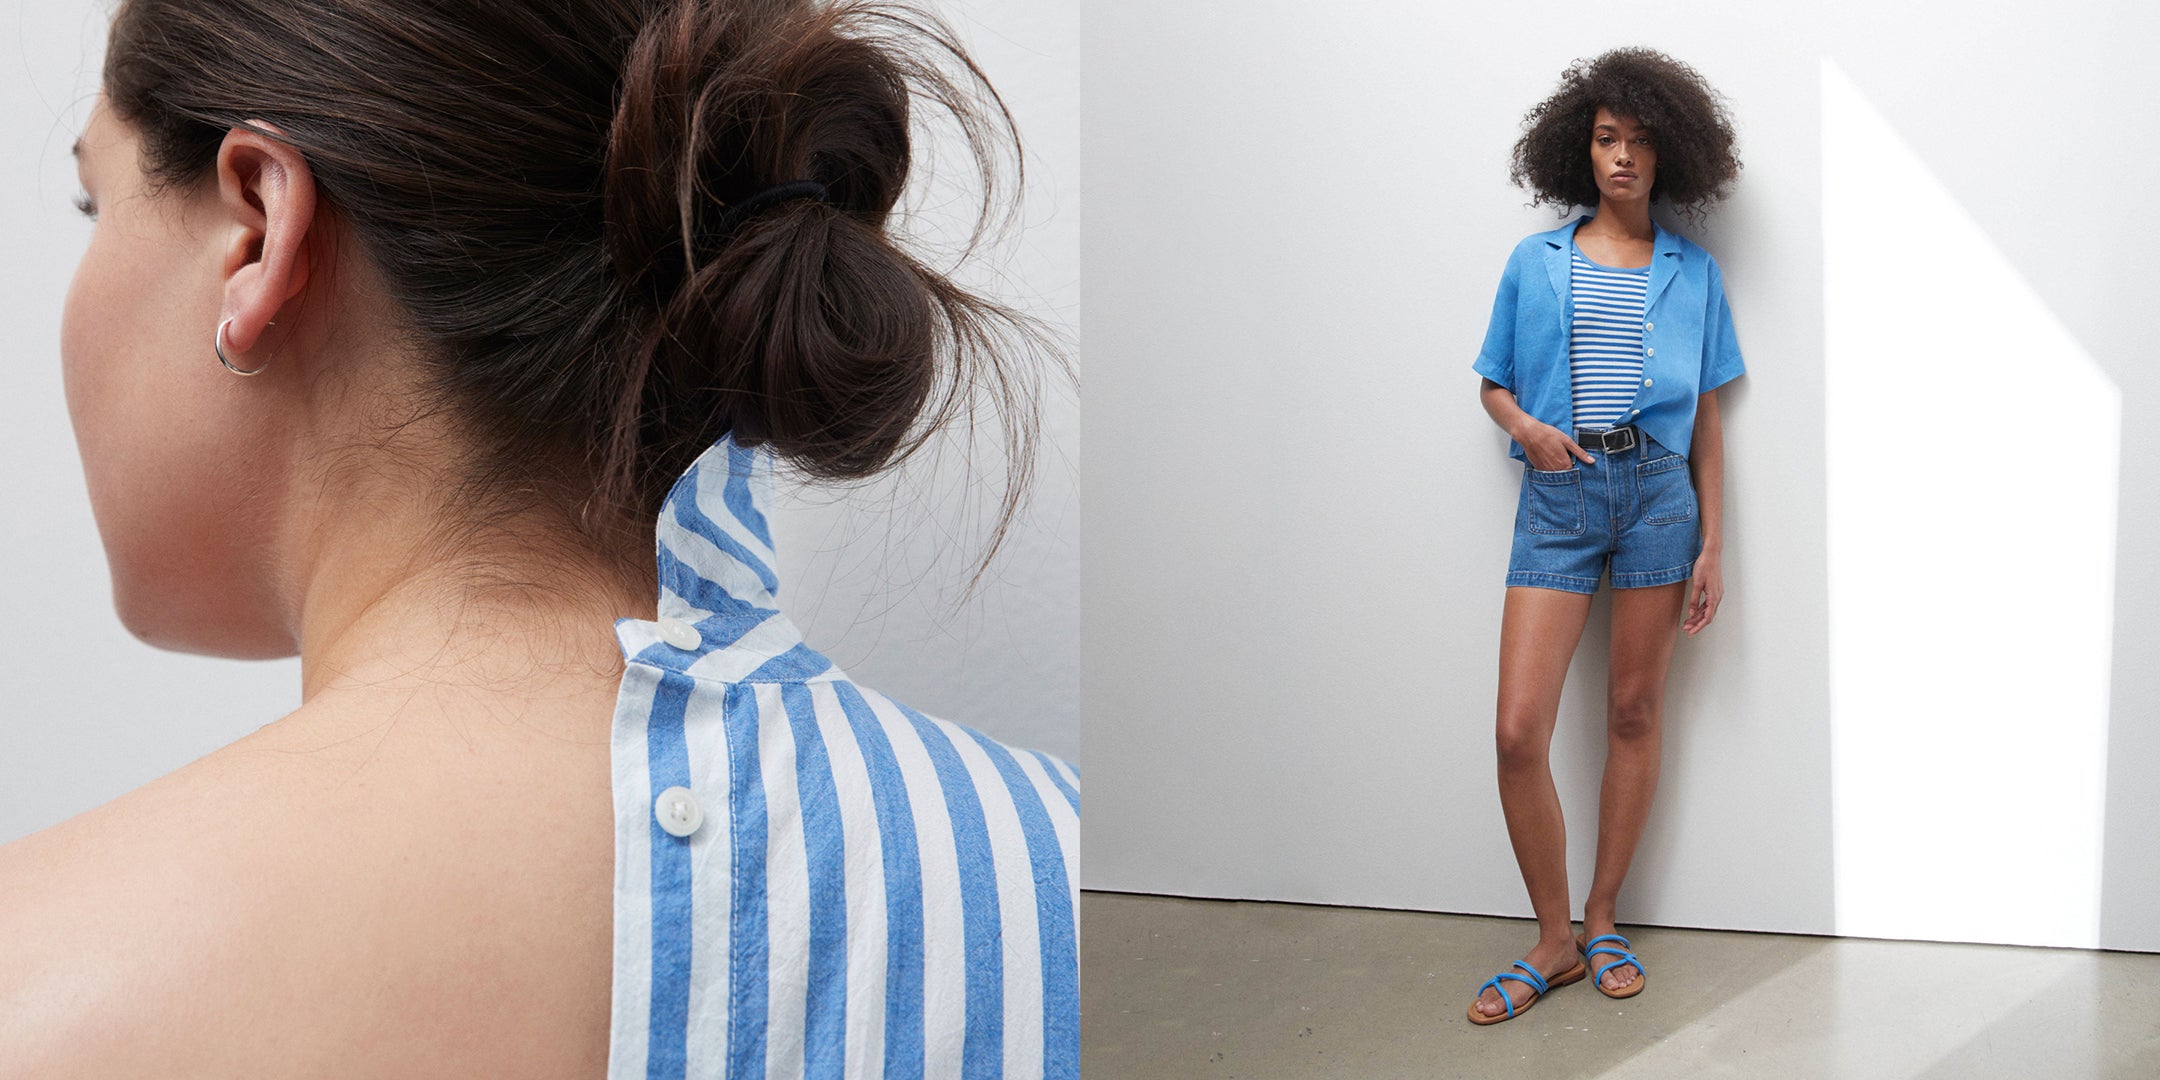 On the left, a picture of an individual's back, with a striped chambray shirt draped over their shoulder; on the right, a model wearing a blue striped Madewell t-shirt, Madewell denim shorts with a black leather belt, a blue Madewell camp collar shirt, and Madewell blue leather sandals